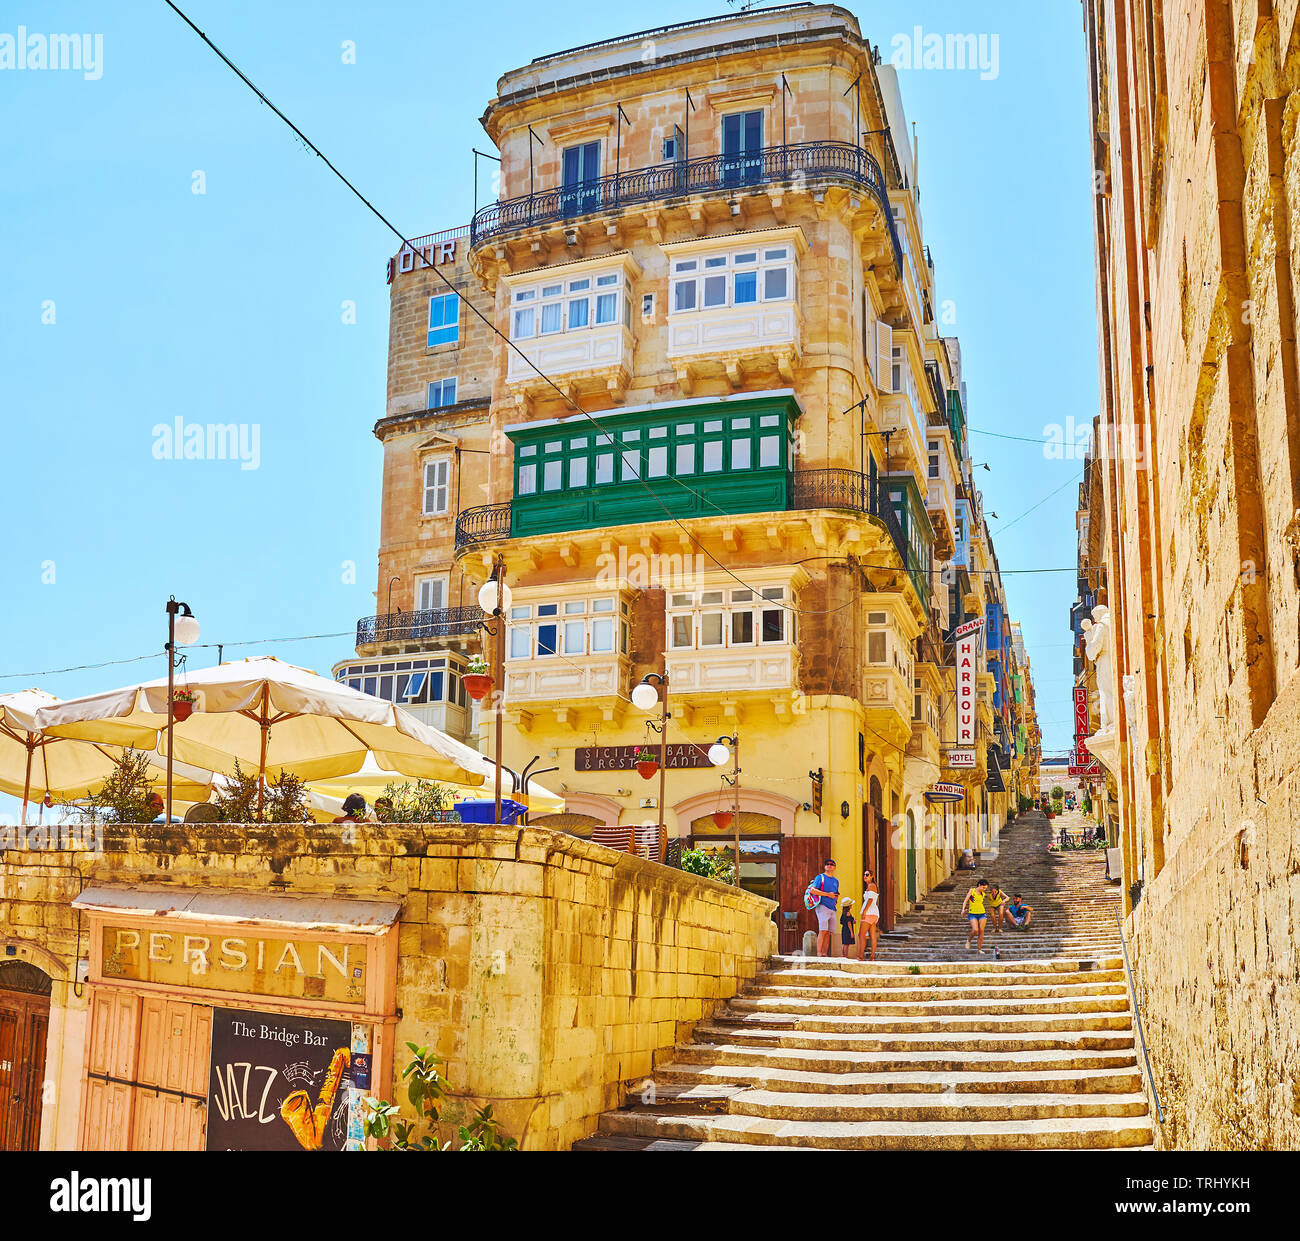 VALLETTA, MALTA - JUNE 19, 2018: The narrow hilly St Ursula street with long staircase, historic edifices, outdoor restaurants and small shops, on Jun Stock Photo